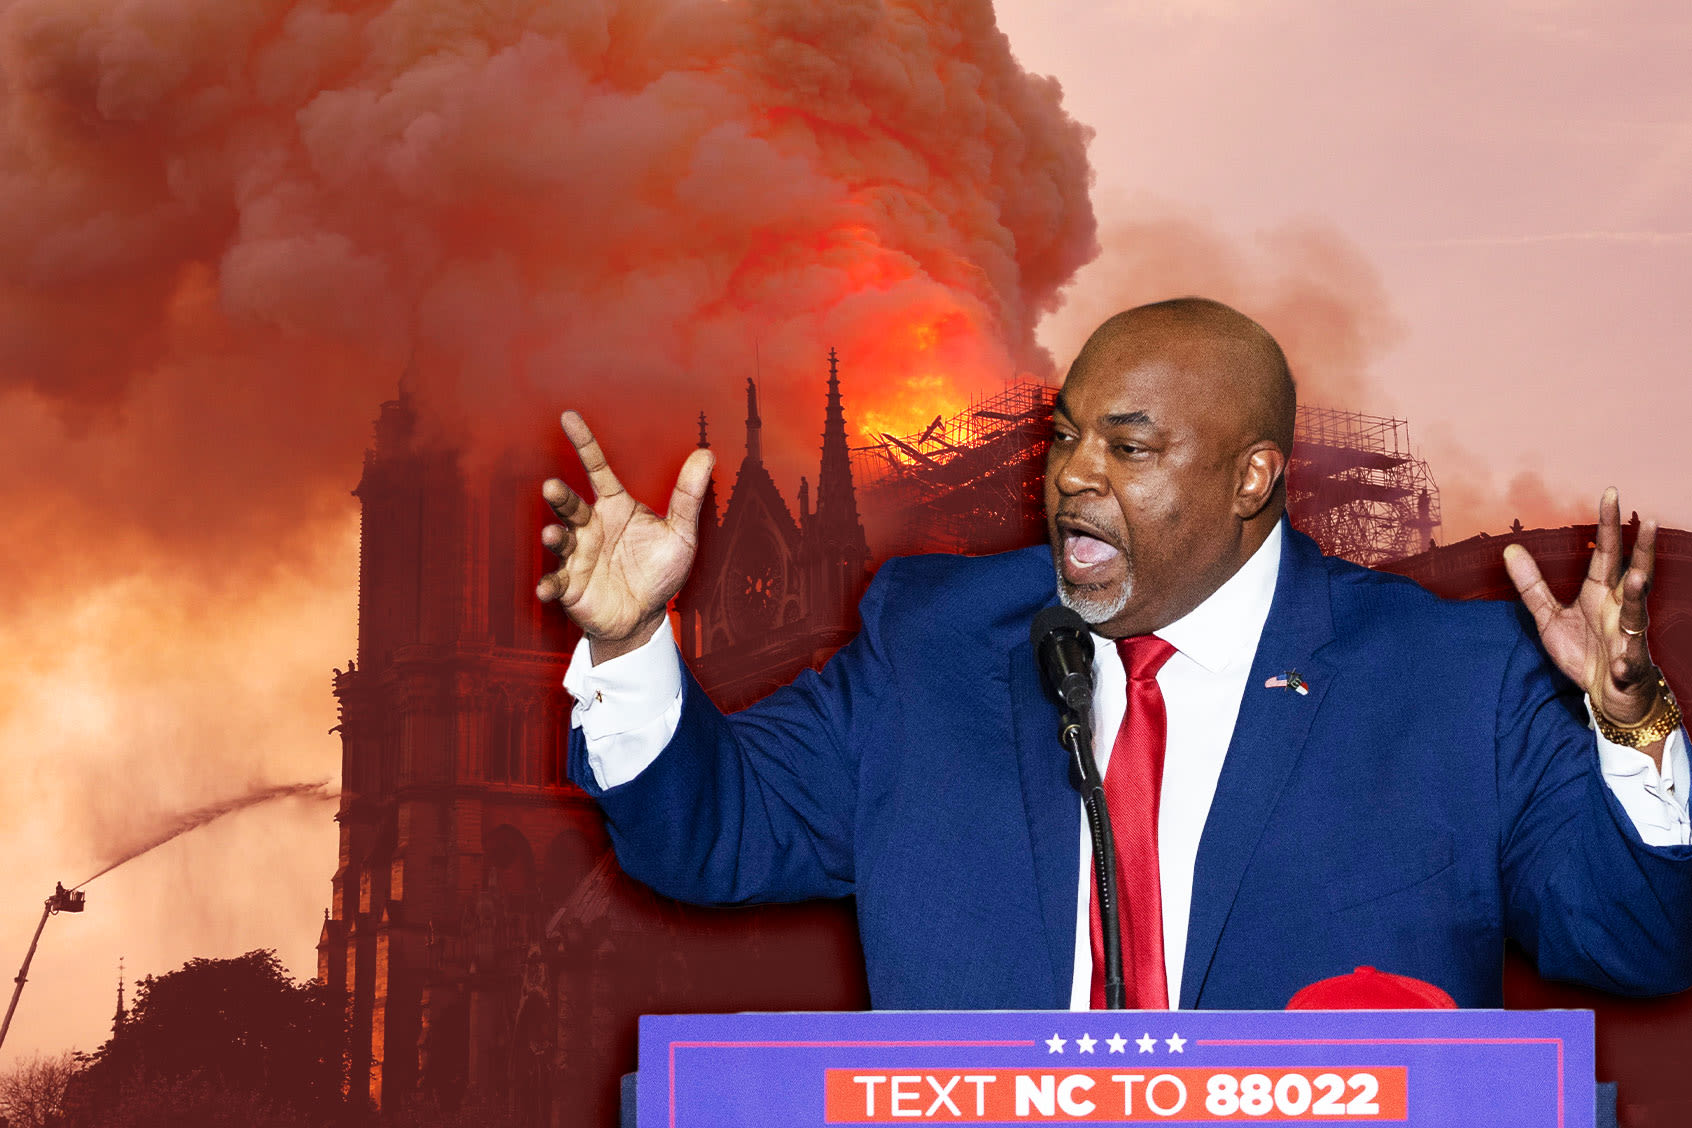 Mark Robinson said Obama was "cousins" with ISIS, falsely blamed Muslims for burning down Notre Dame